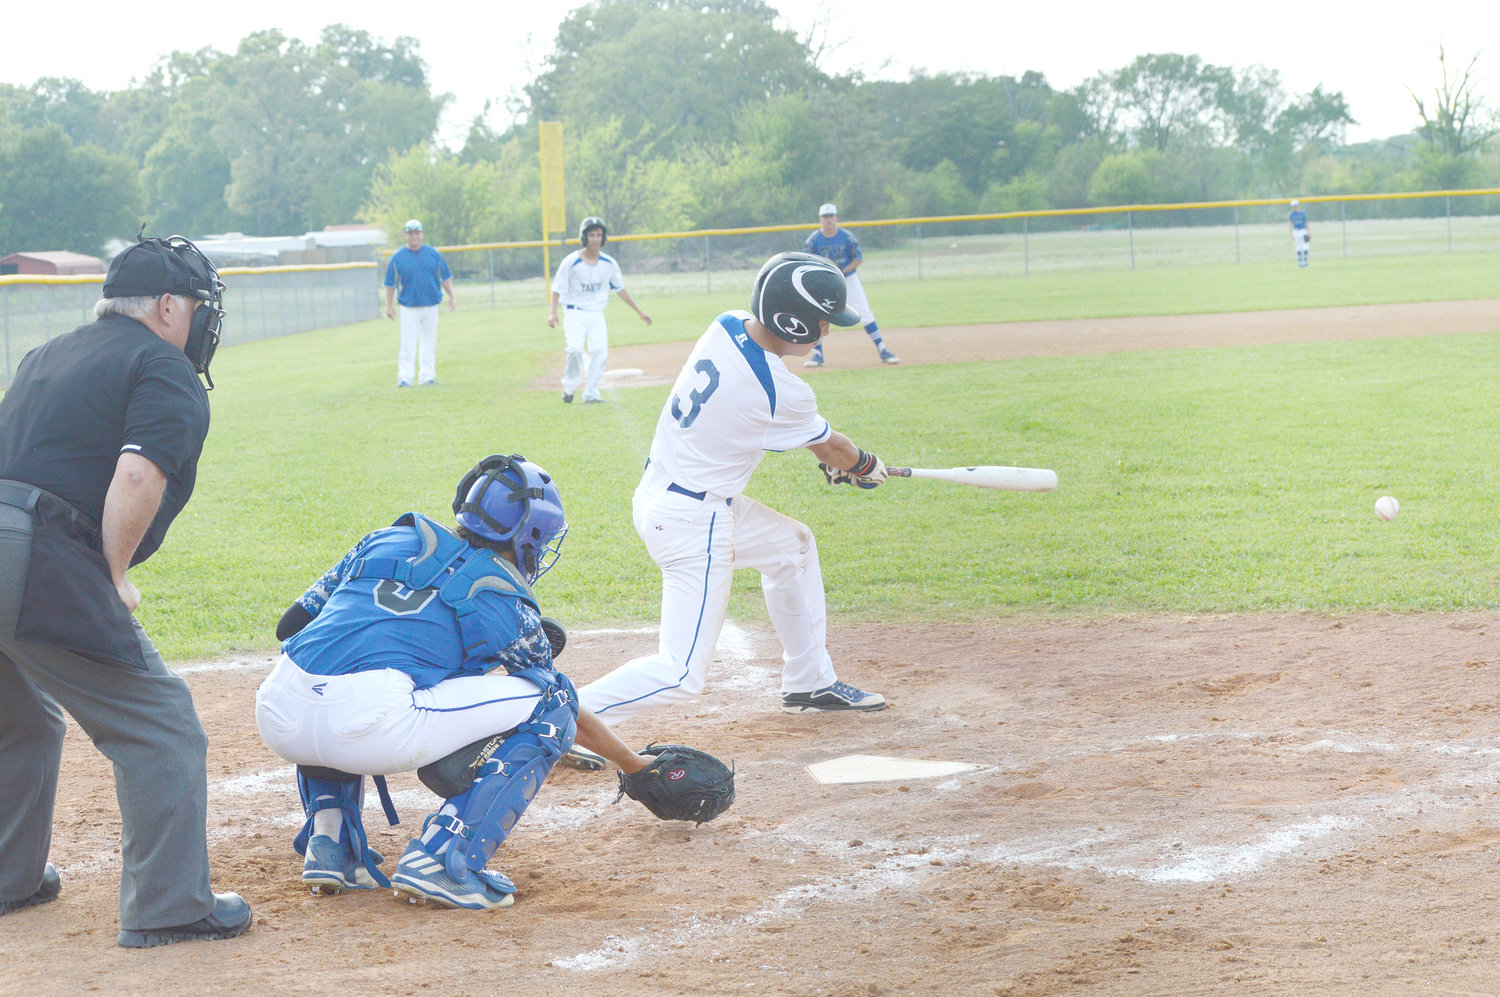 J.C. Nolan gets a hit in the Yantis Owls’ win over Fruitvale.